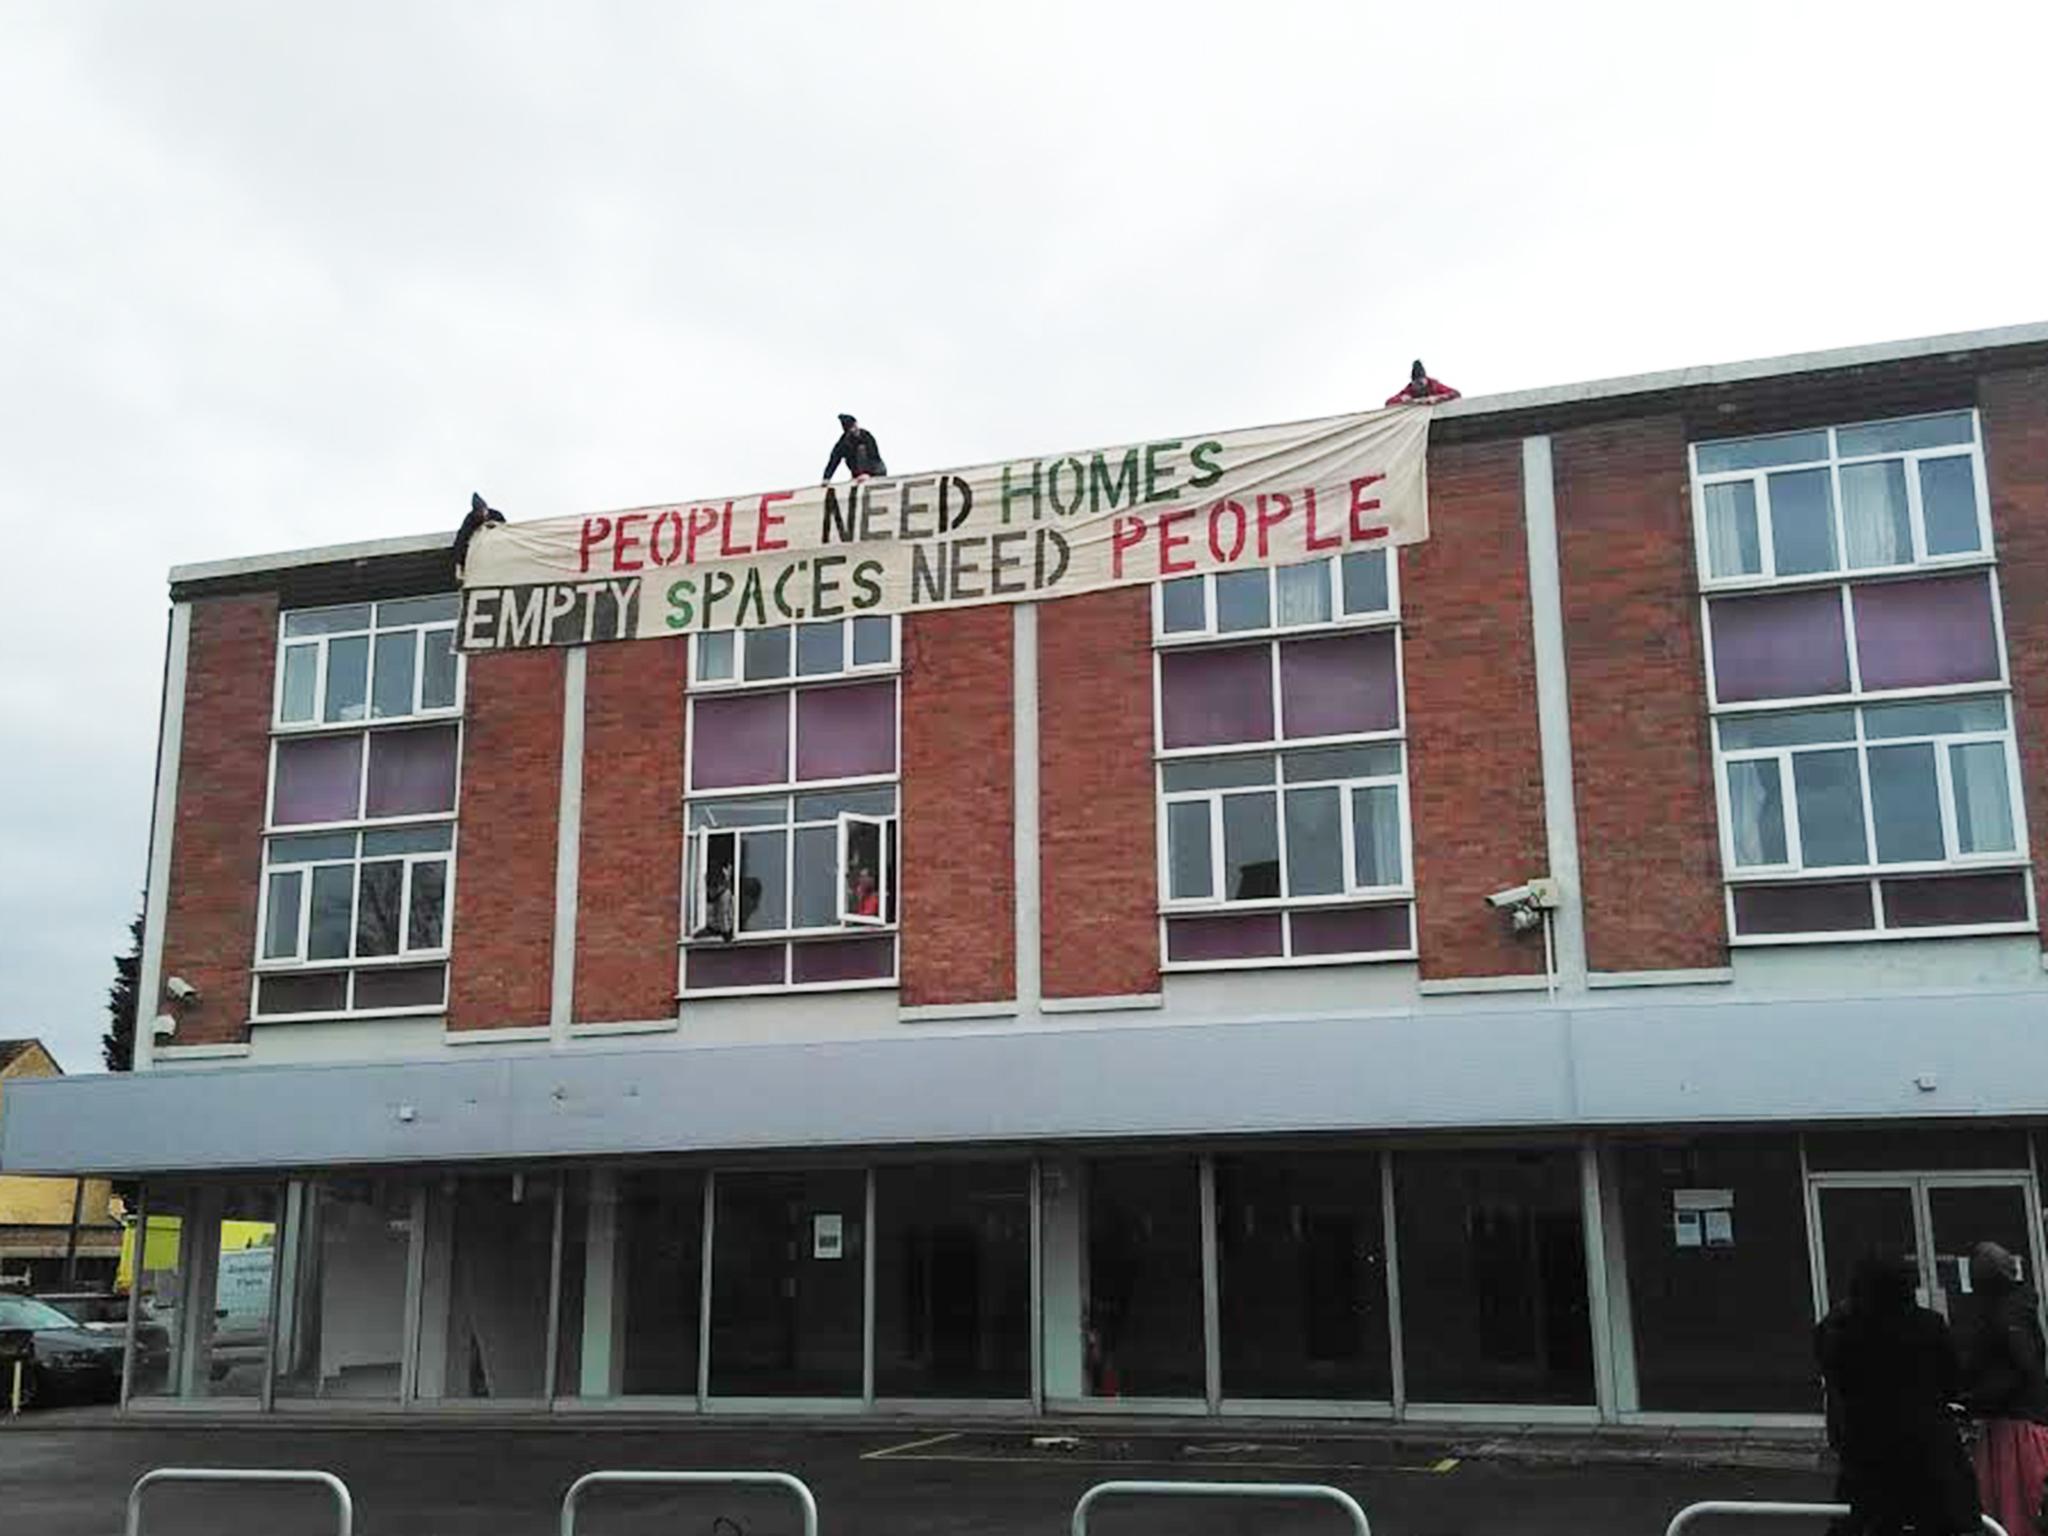 Activists drop a banner from the Iffley Road building, owned by Wadham college